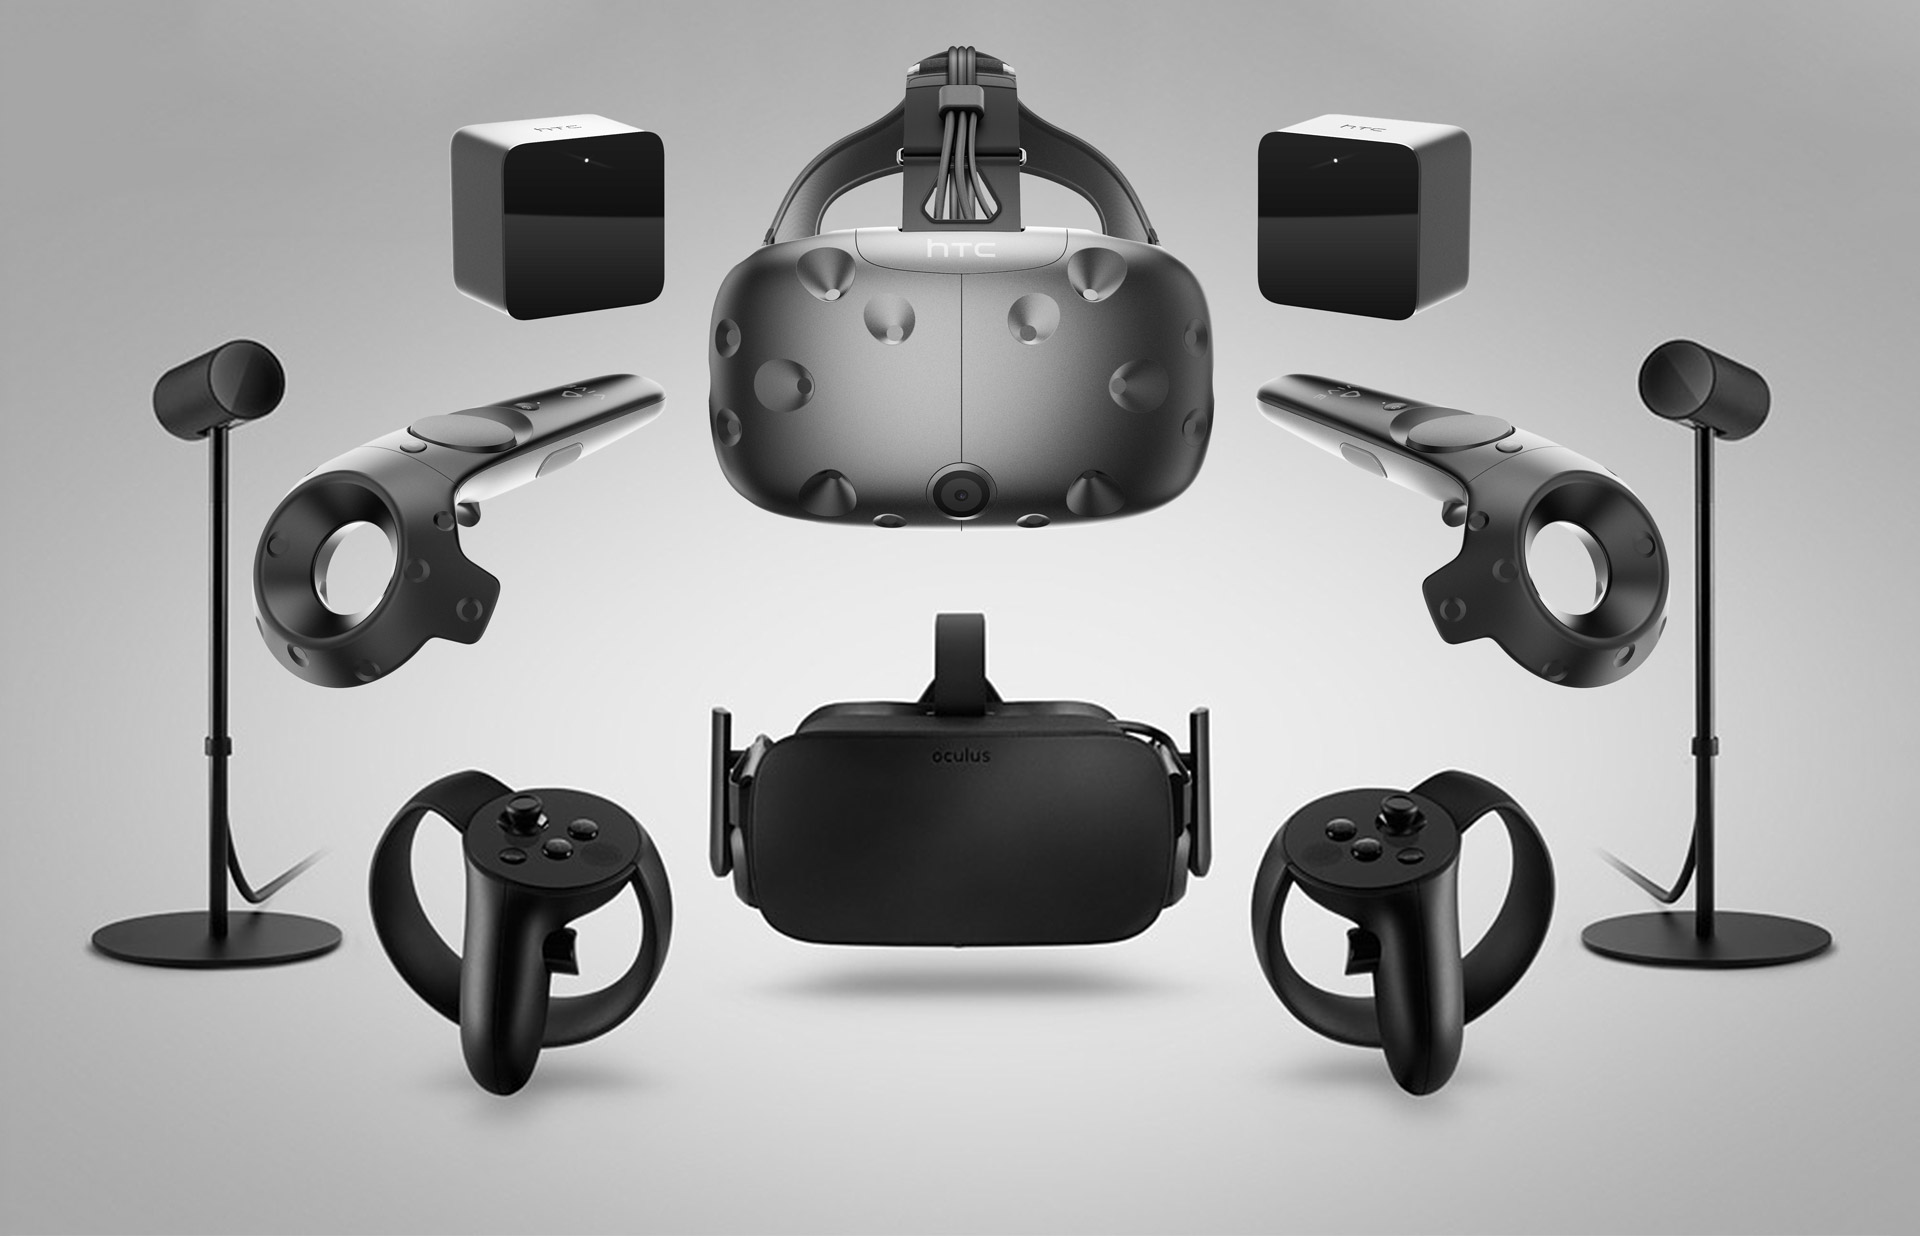 hot dogs horseshoes and hand grenades oculus rift s controls